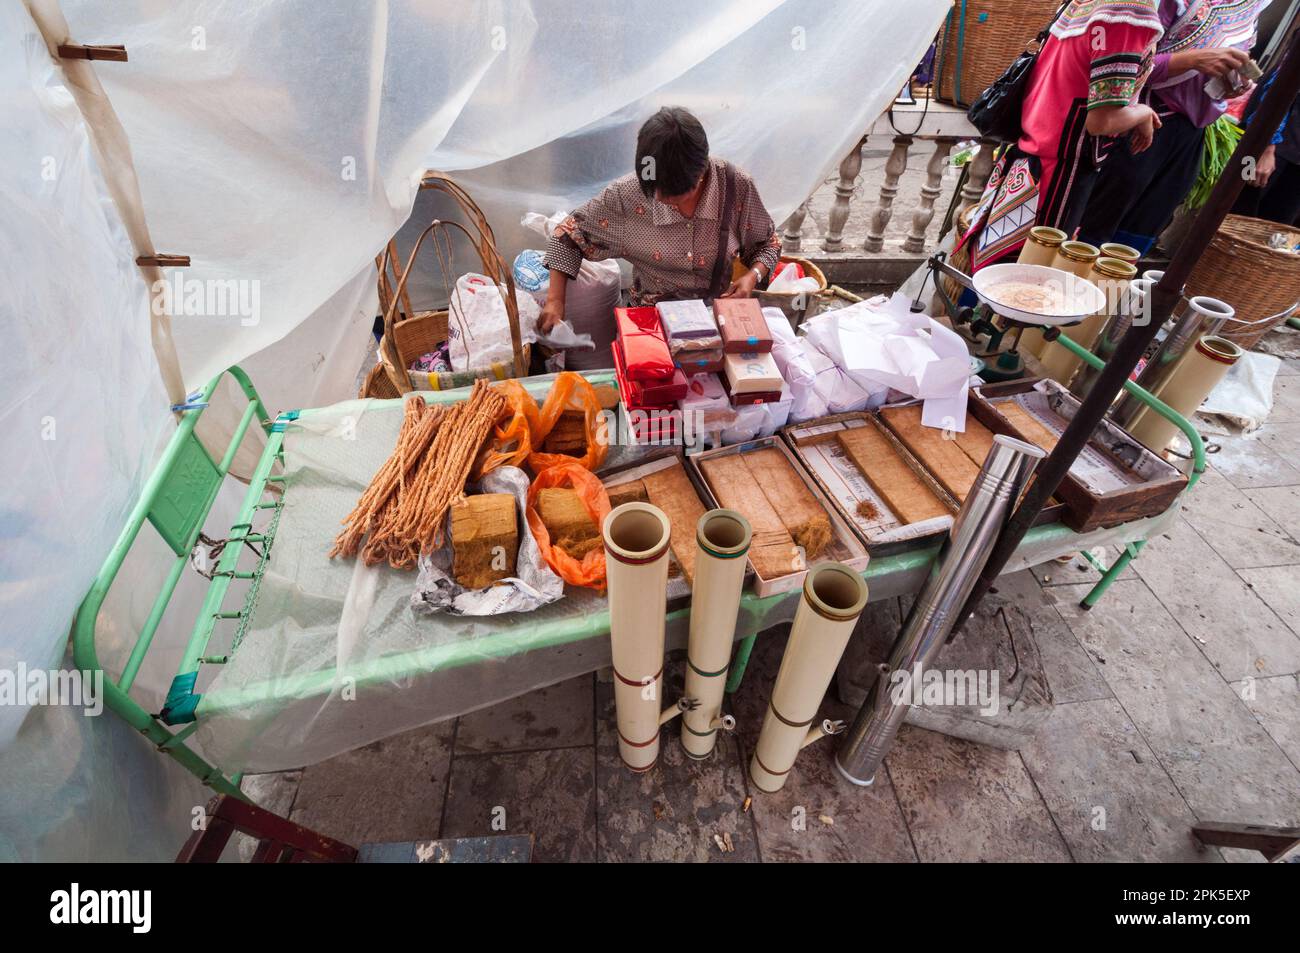 A woman packaging parcels of tobacco for sale in a small market stall in Jianshui Yunnan Province China Stock Photo